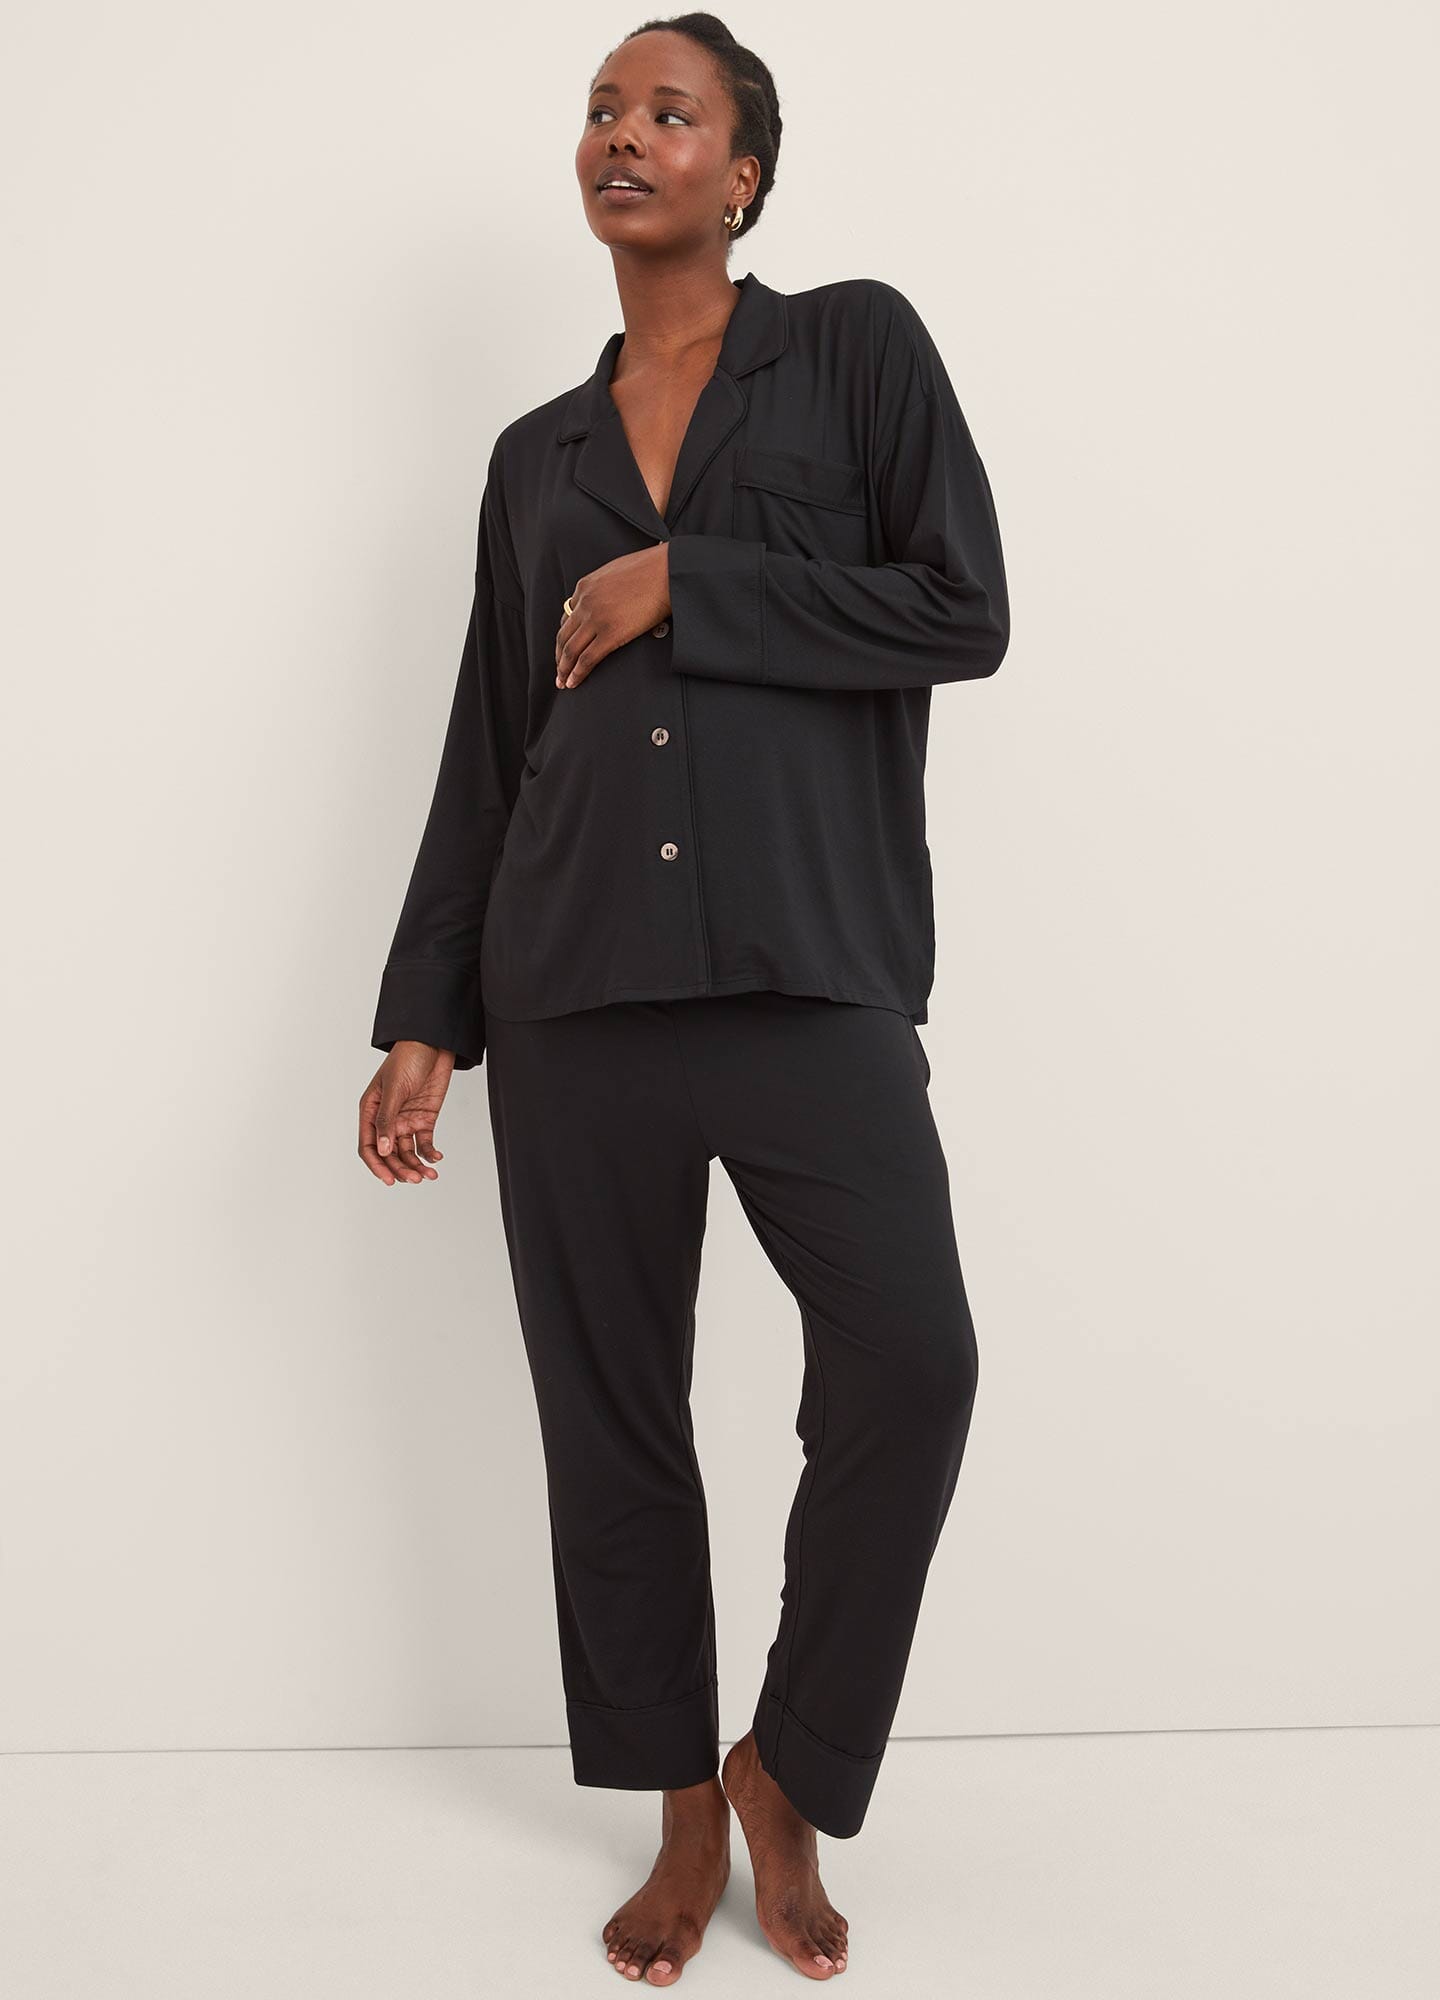 Chic and Comfortable Maternity Sleepwear for Tranquil Nights